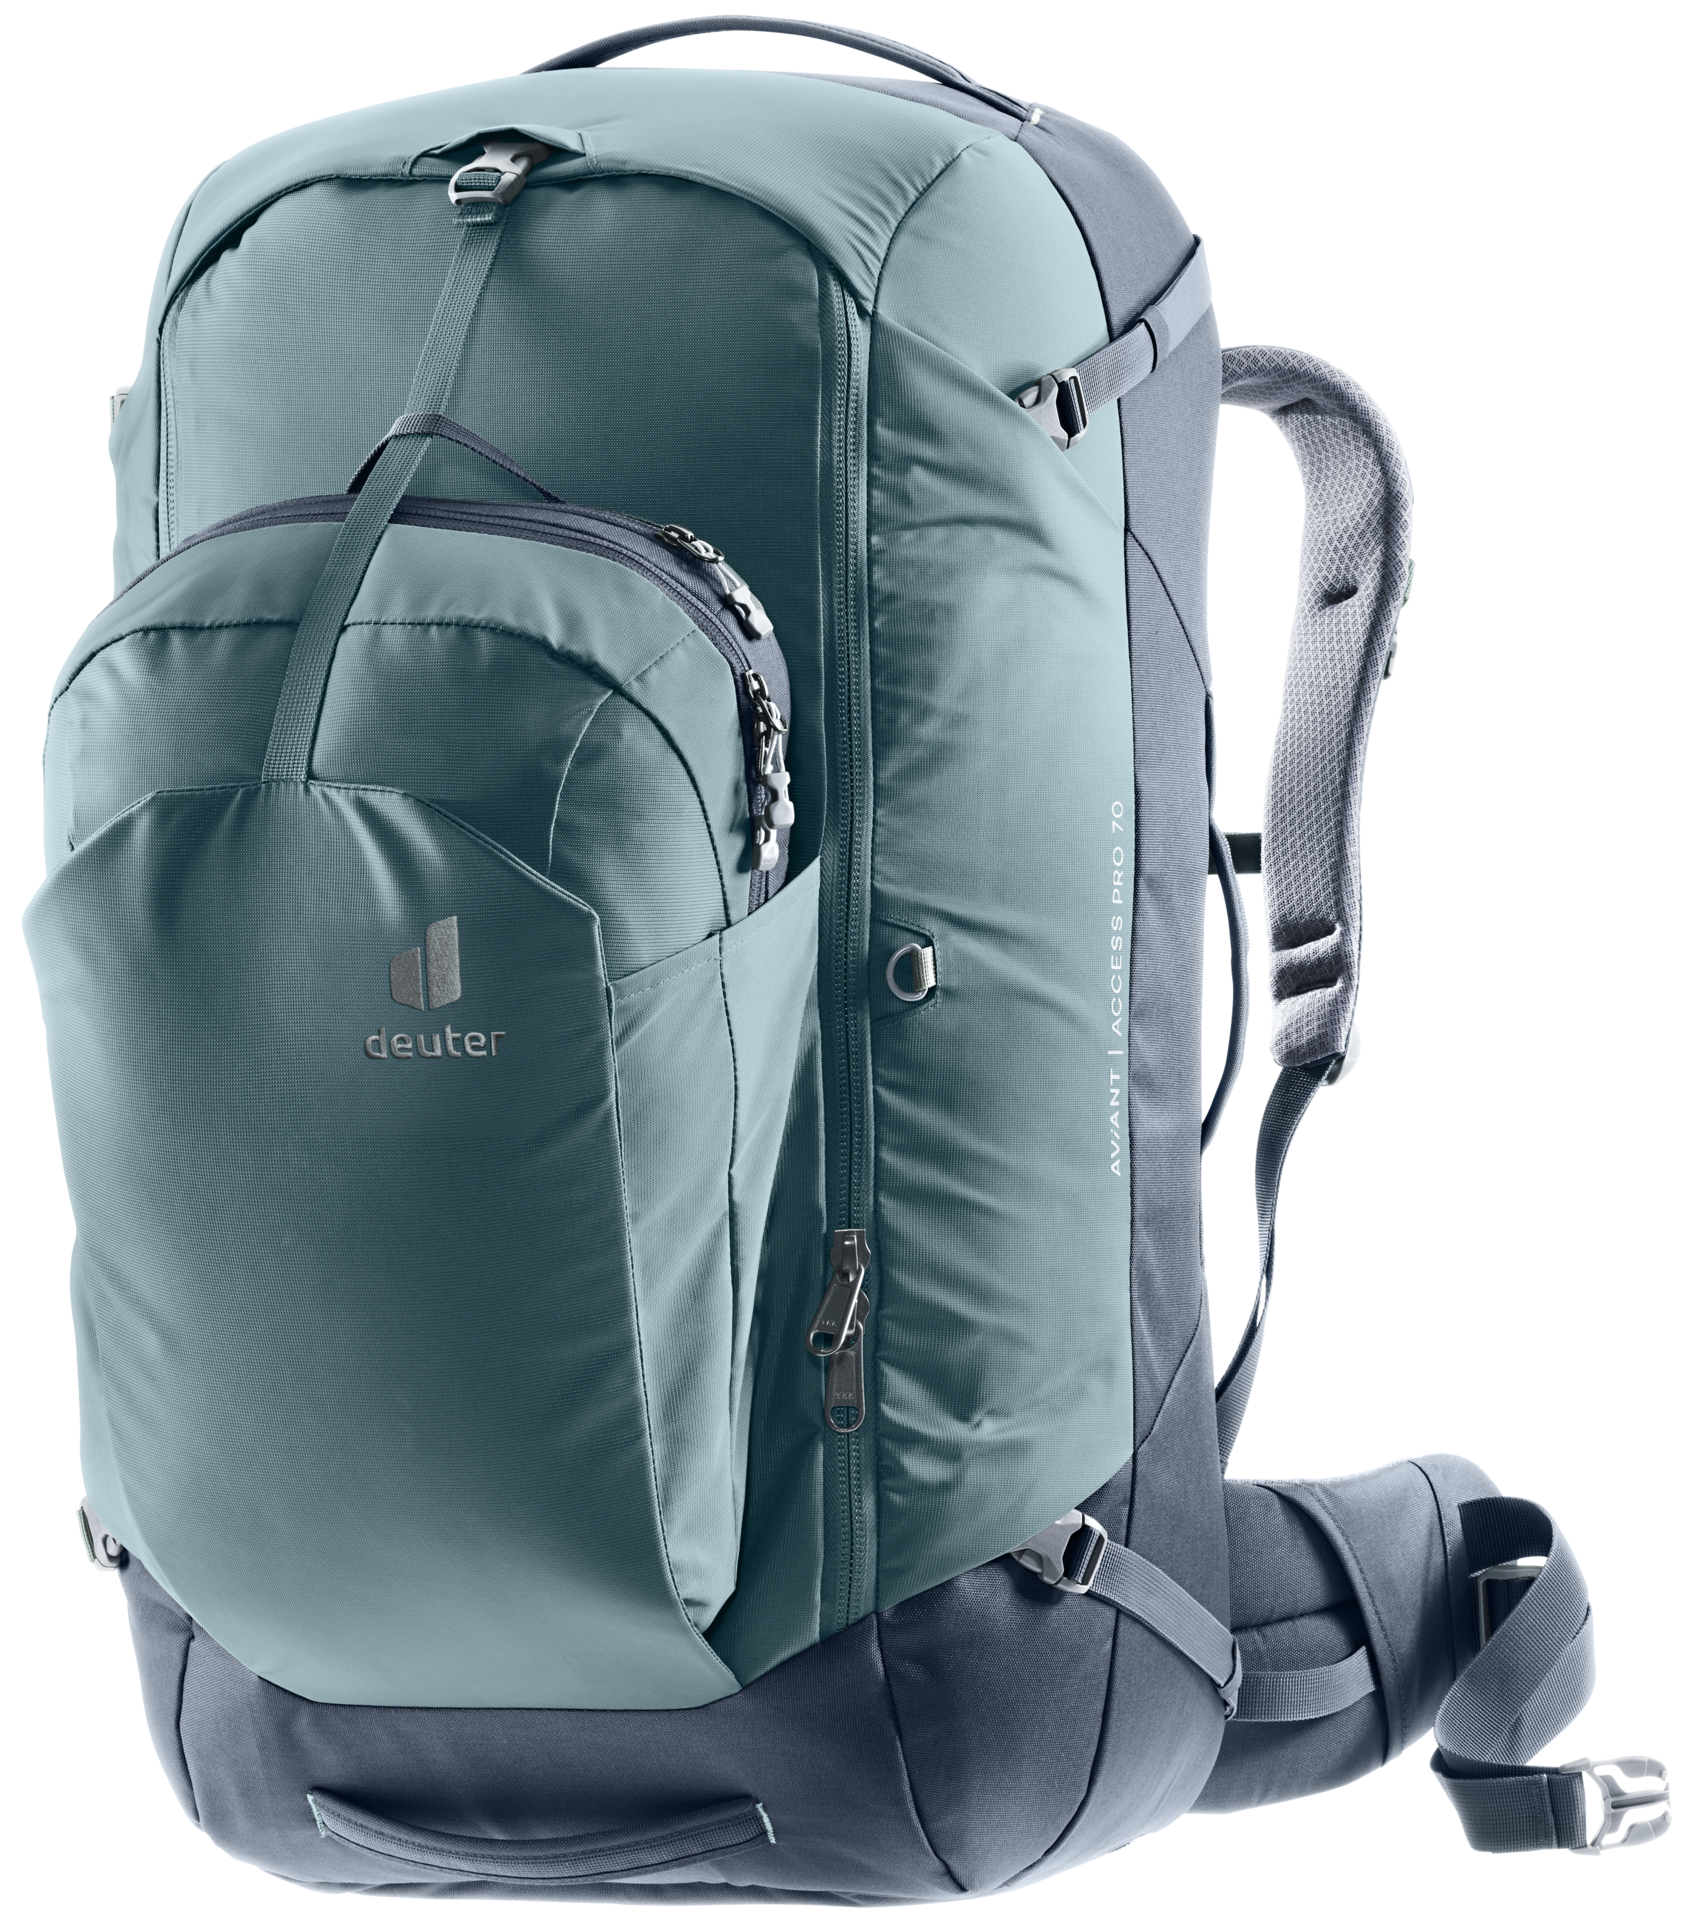 Disco bewondering syndroom deuter AViANT Access Pro 70 | Travel backpack